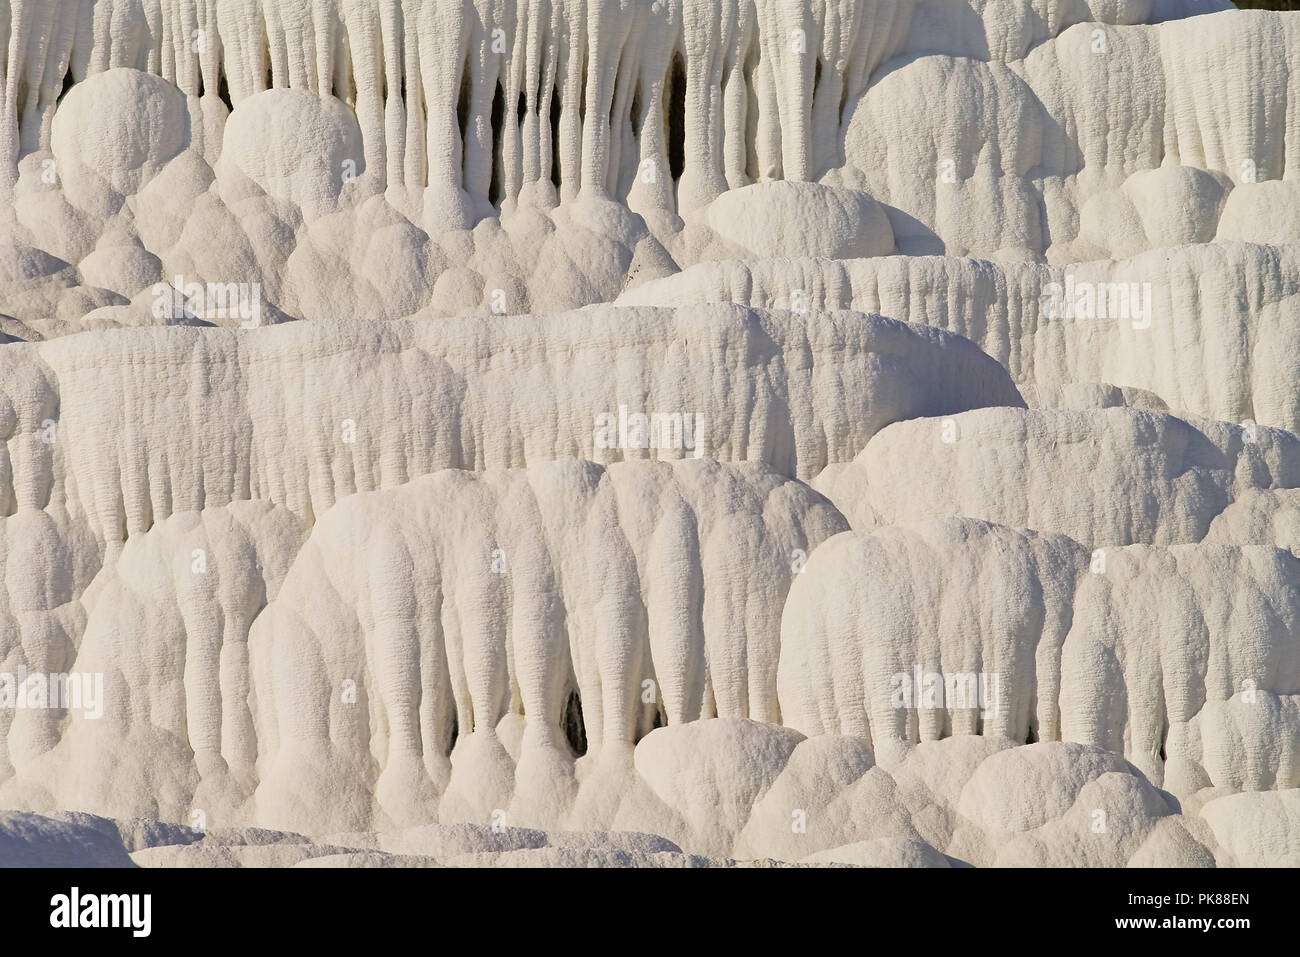 Travertine rock formations from calcium deposits Stock Photo